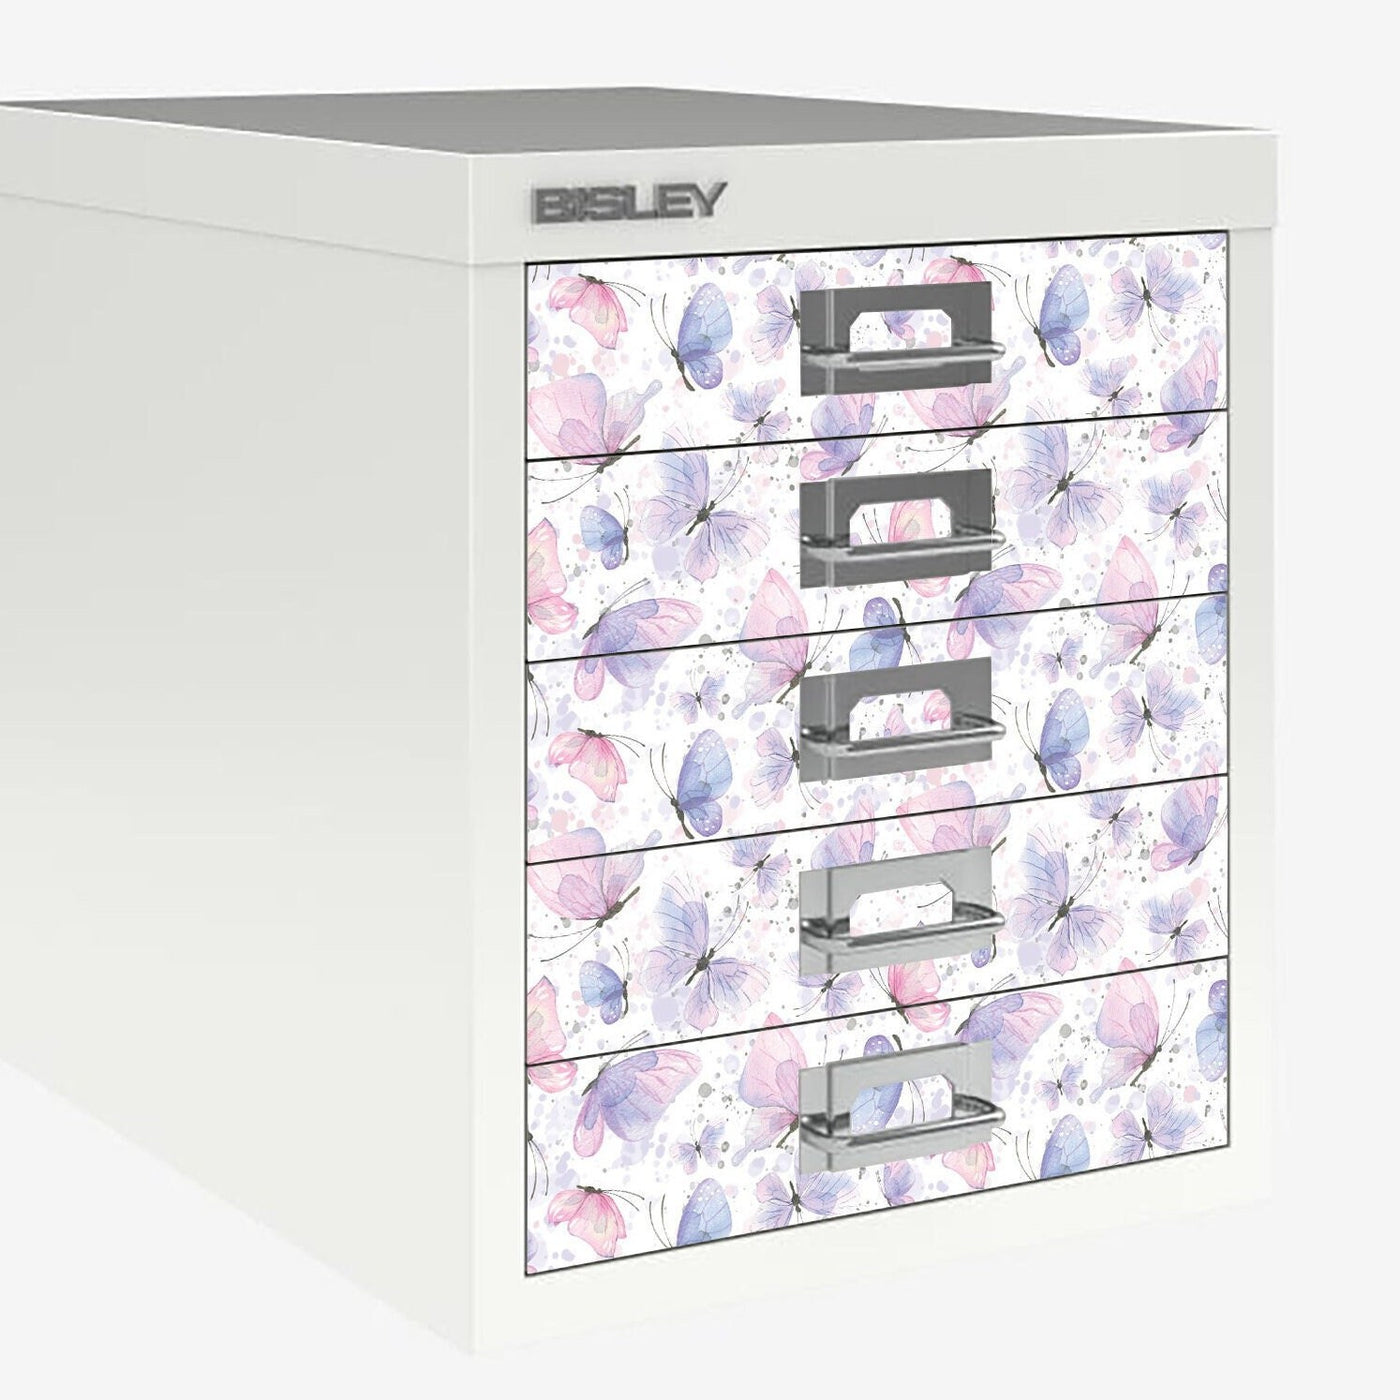 Butterfly decals for Bisley 5 drawer cabinet (not included)